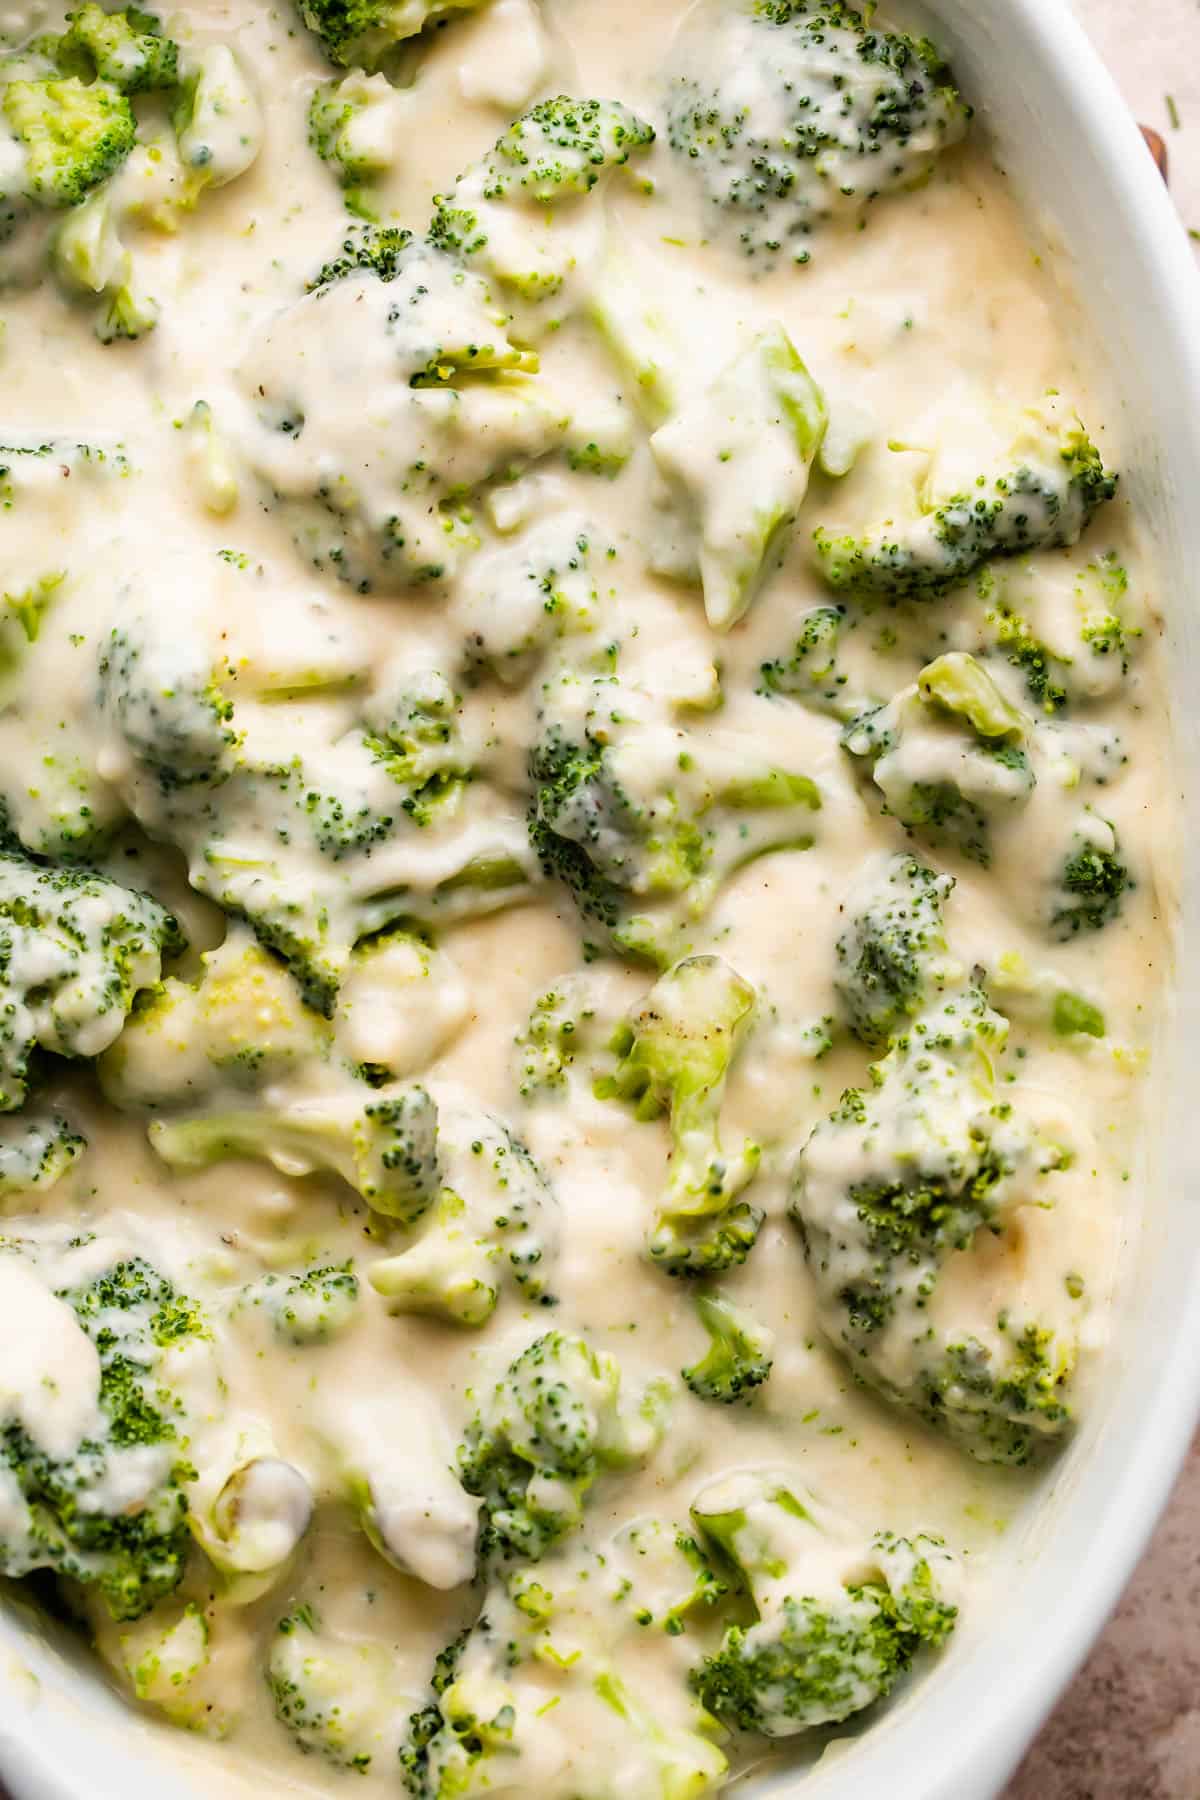 broccoli florets in a creamy cheese sauce.